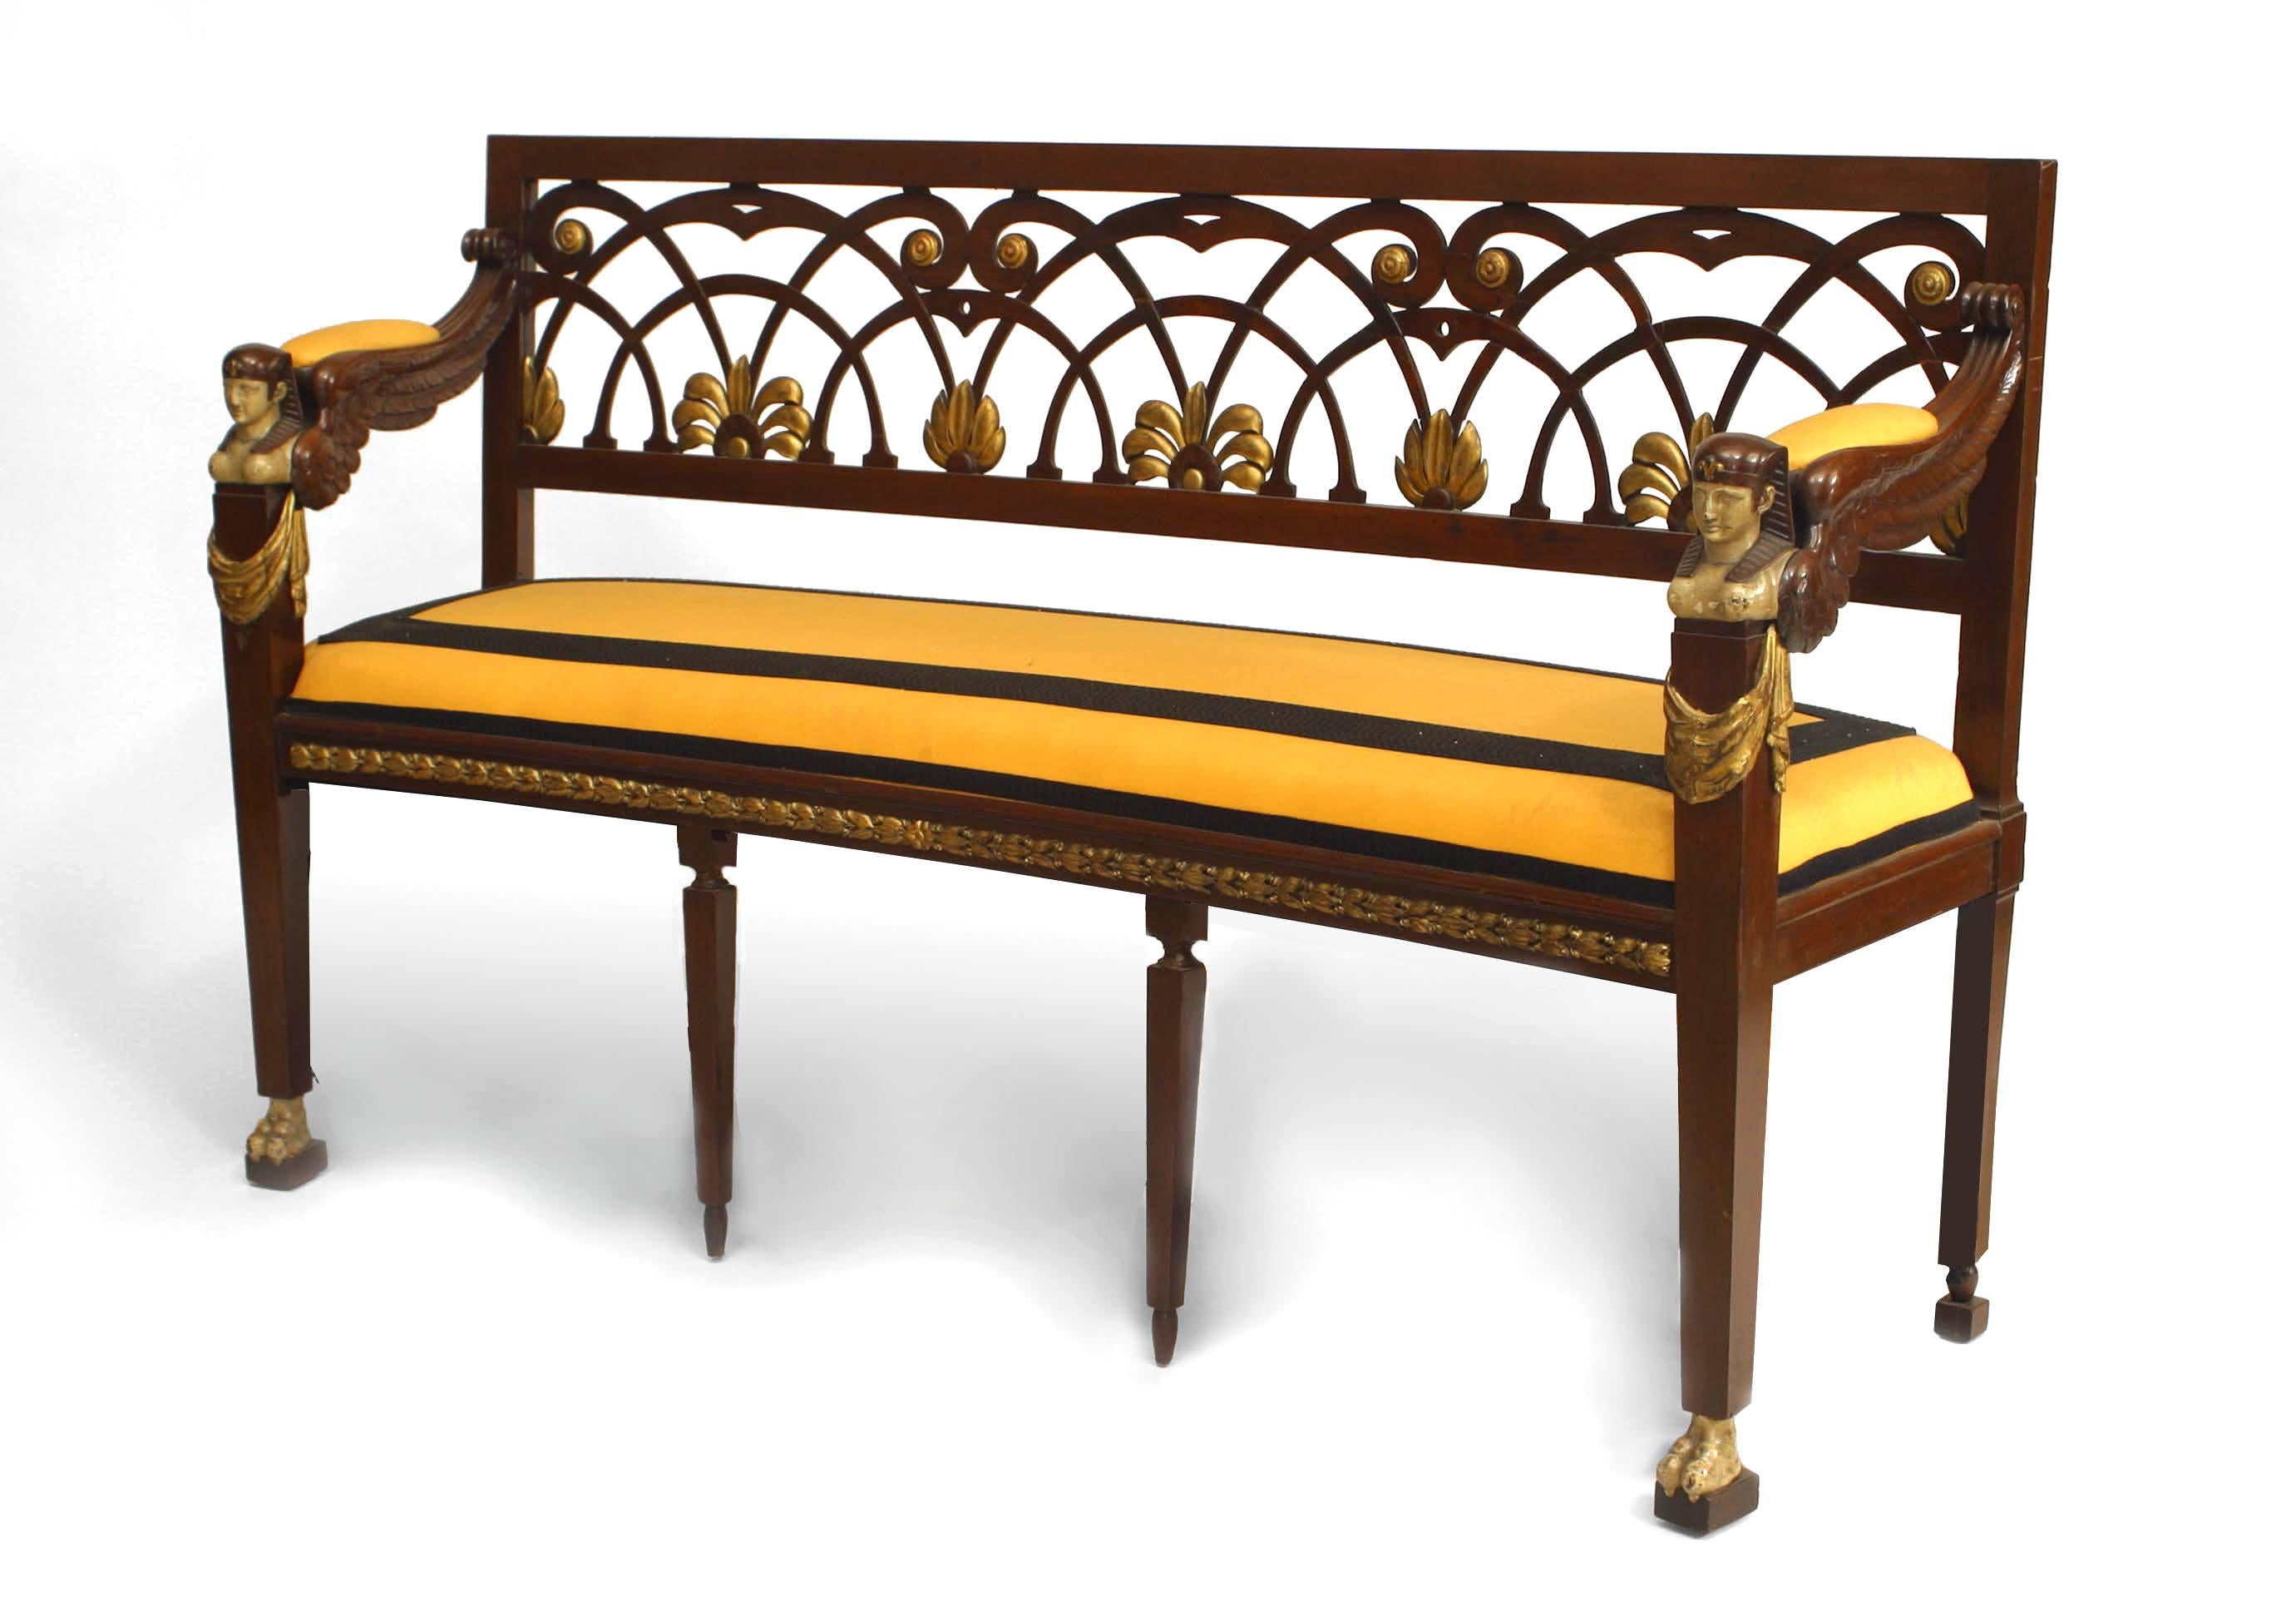 Pair of French Empire style (19th Cent) Egyptian Neo-classic design mahogany loveseats with filigree back and yellow upholstery
